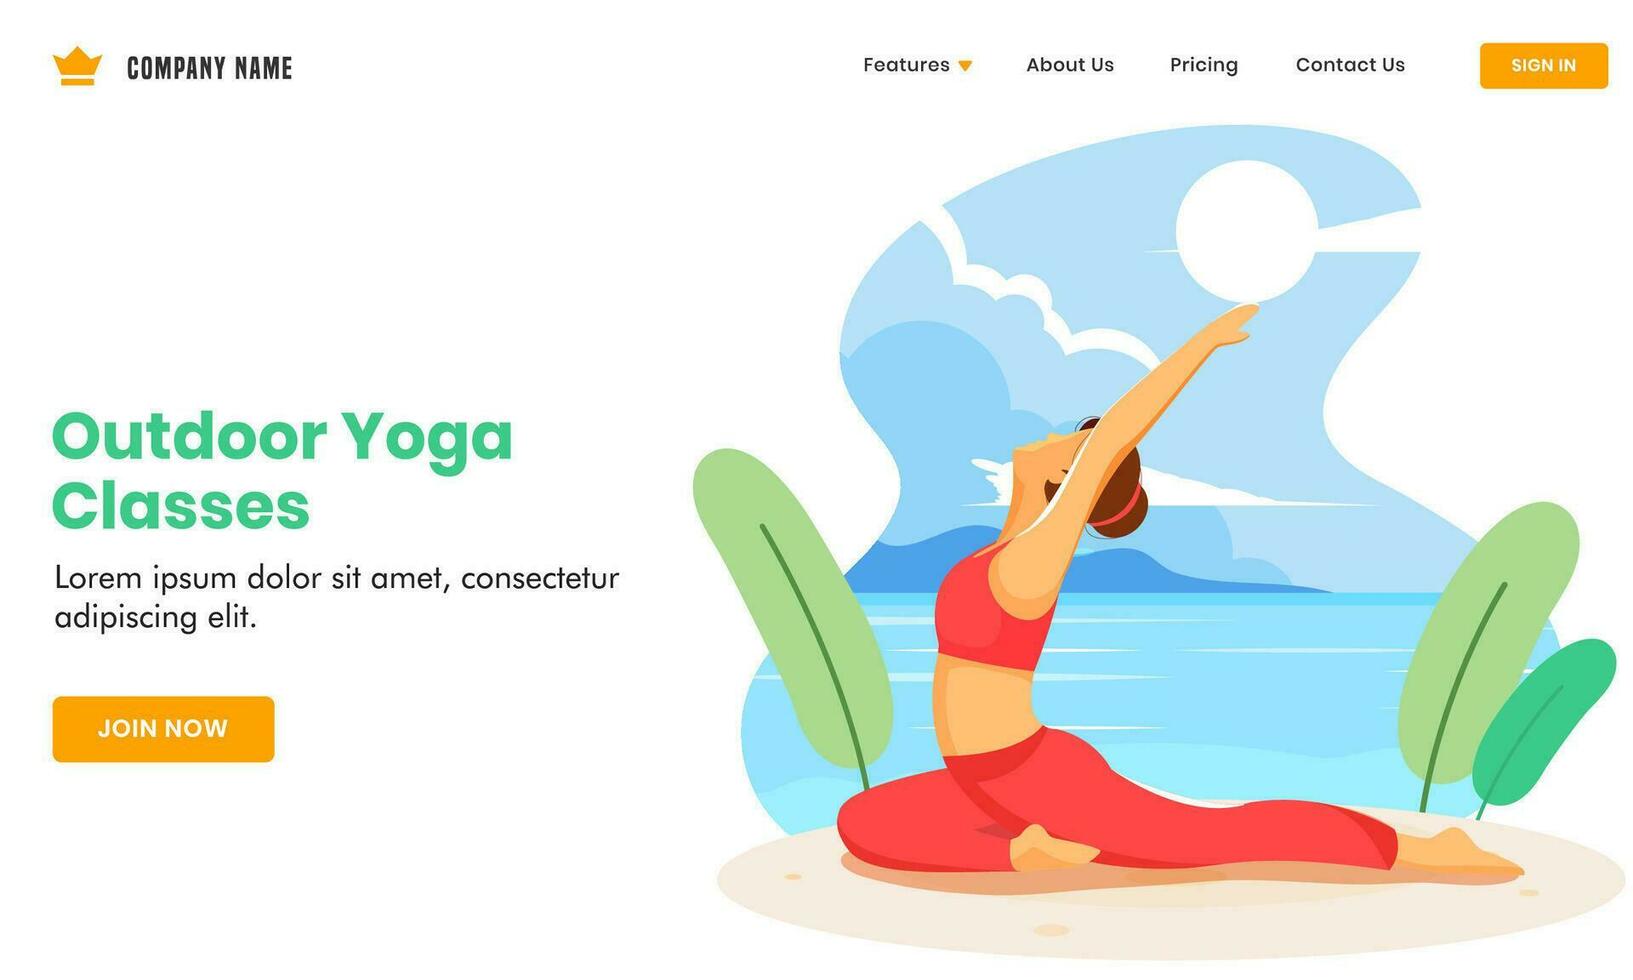 Outdoor Yoga Classes Based Landing Page Design with Illustration of Young Woman Doing Yoga in Ashwa Sanchalanasana Pose. vector